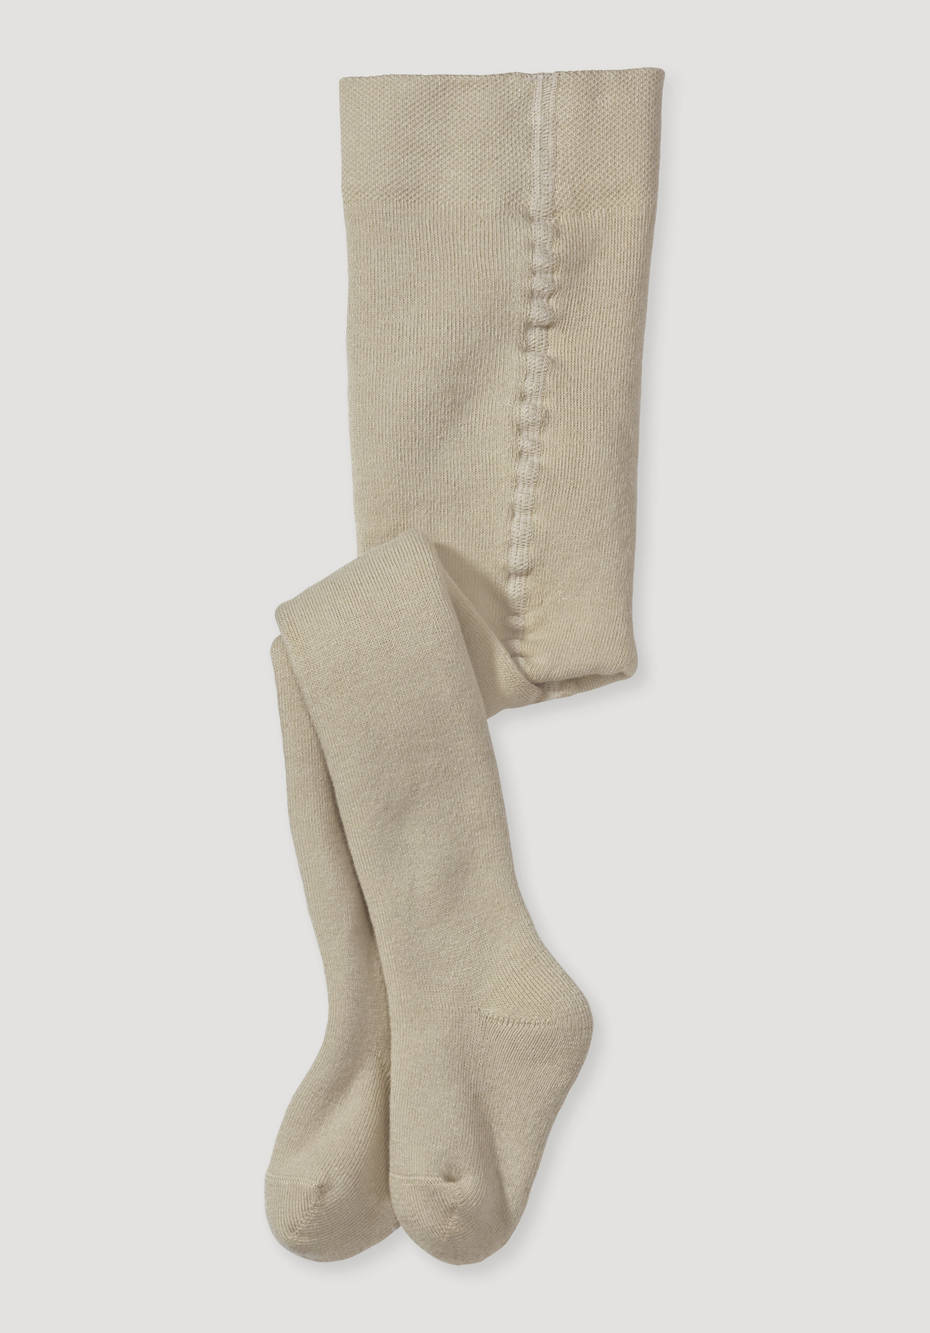 Terrycloth tights made of organic cotton